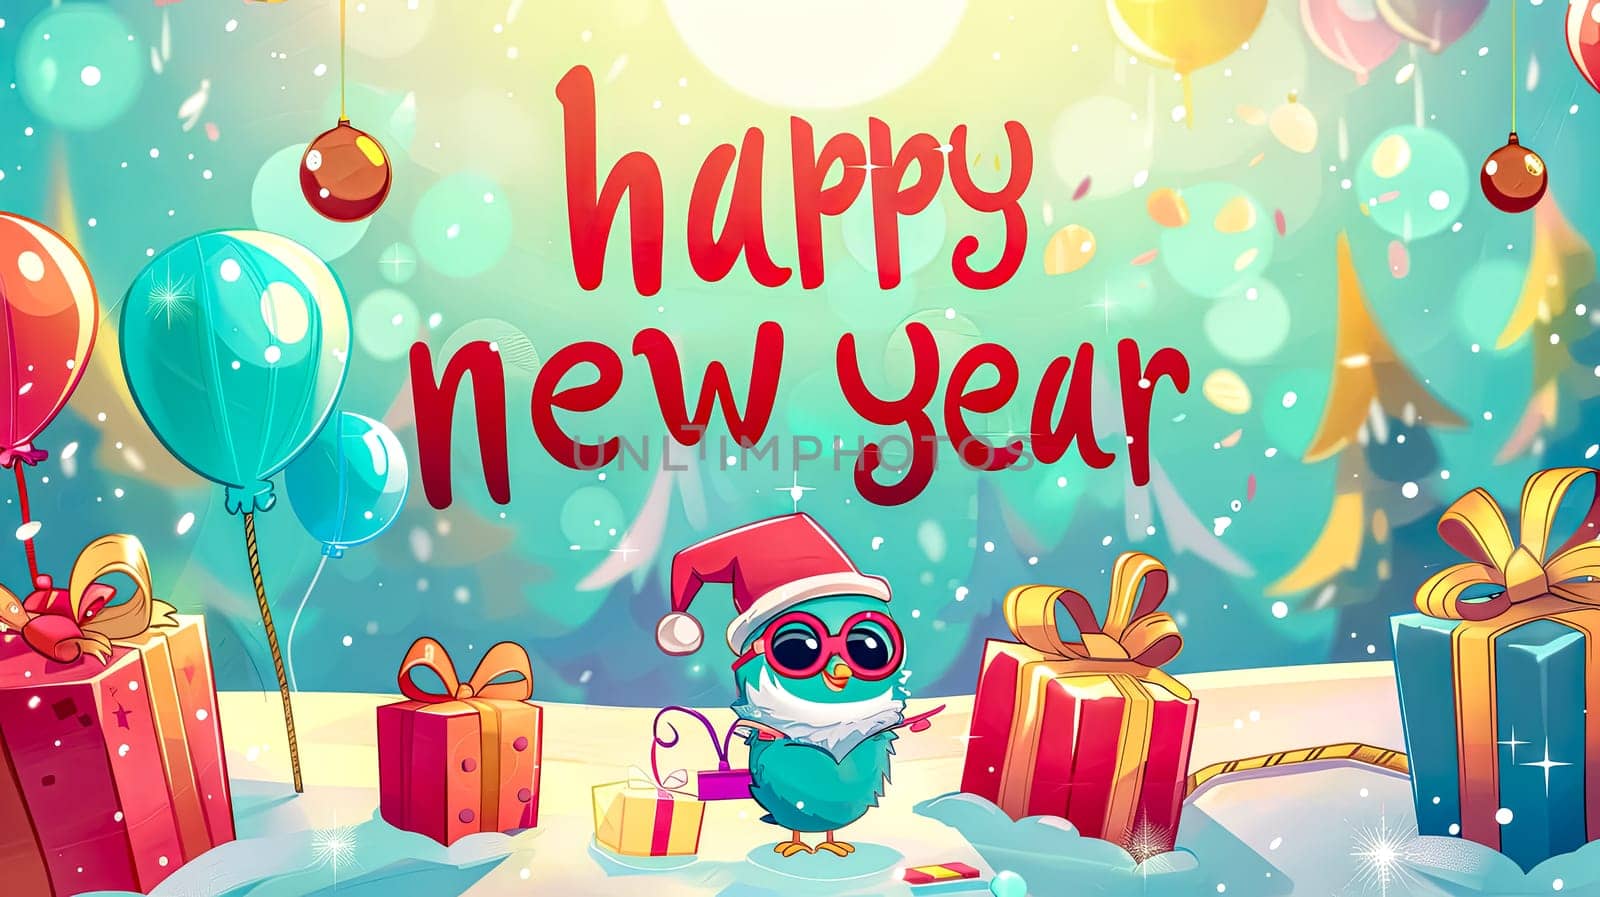 Colorful illustration of cute owl with gifts wishing happy new year